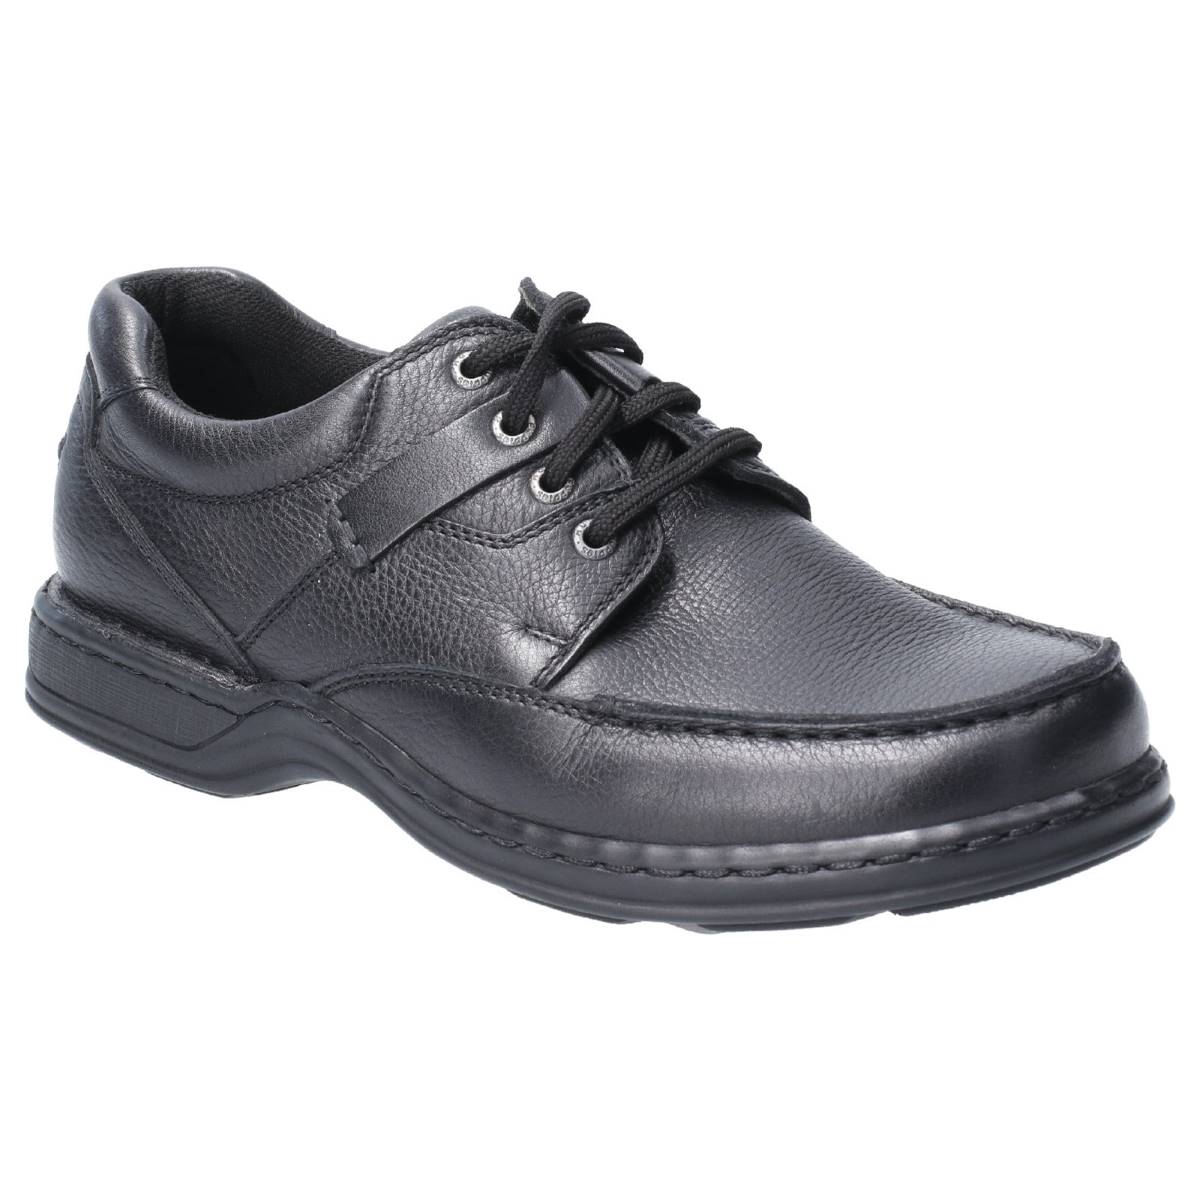 Hush Puppies Randall Ii Black Mens comfort shoes HPM2000-62-1 in a Plain Leather in Size 9